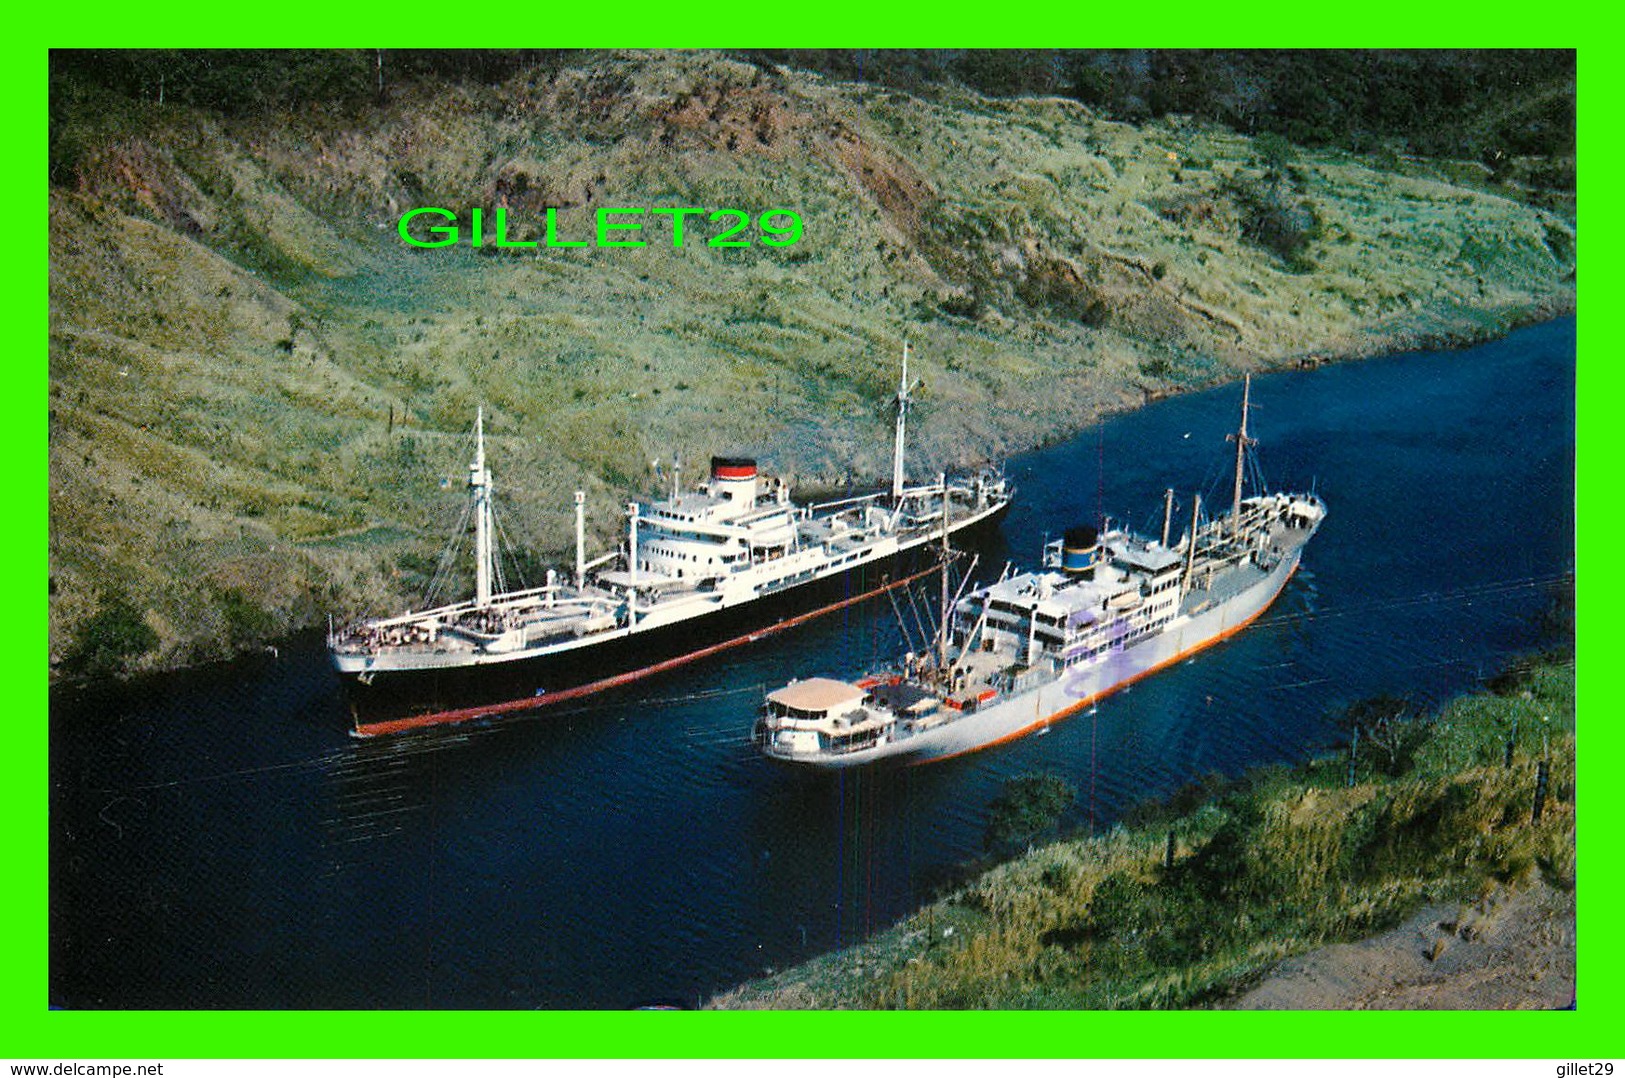 SHIP, BATEAU - TWO OCEAN LINERS IN THE 300-FOOT-WIDE CHANNEL AT CULEBRA CUT, PANAMA CANAL - TRAVEL IN 1987 - - Commerce